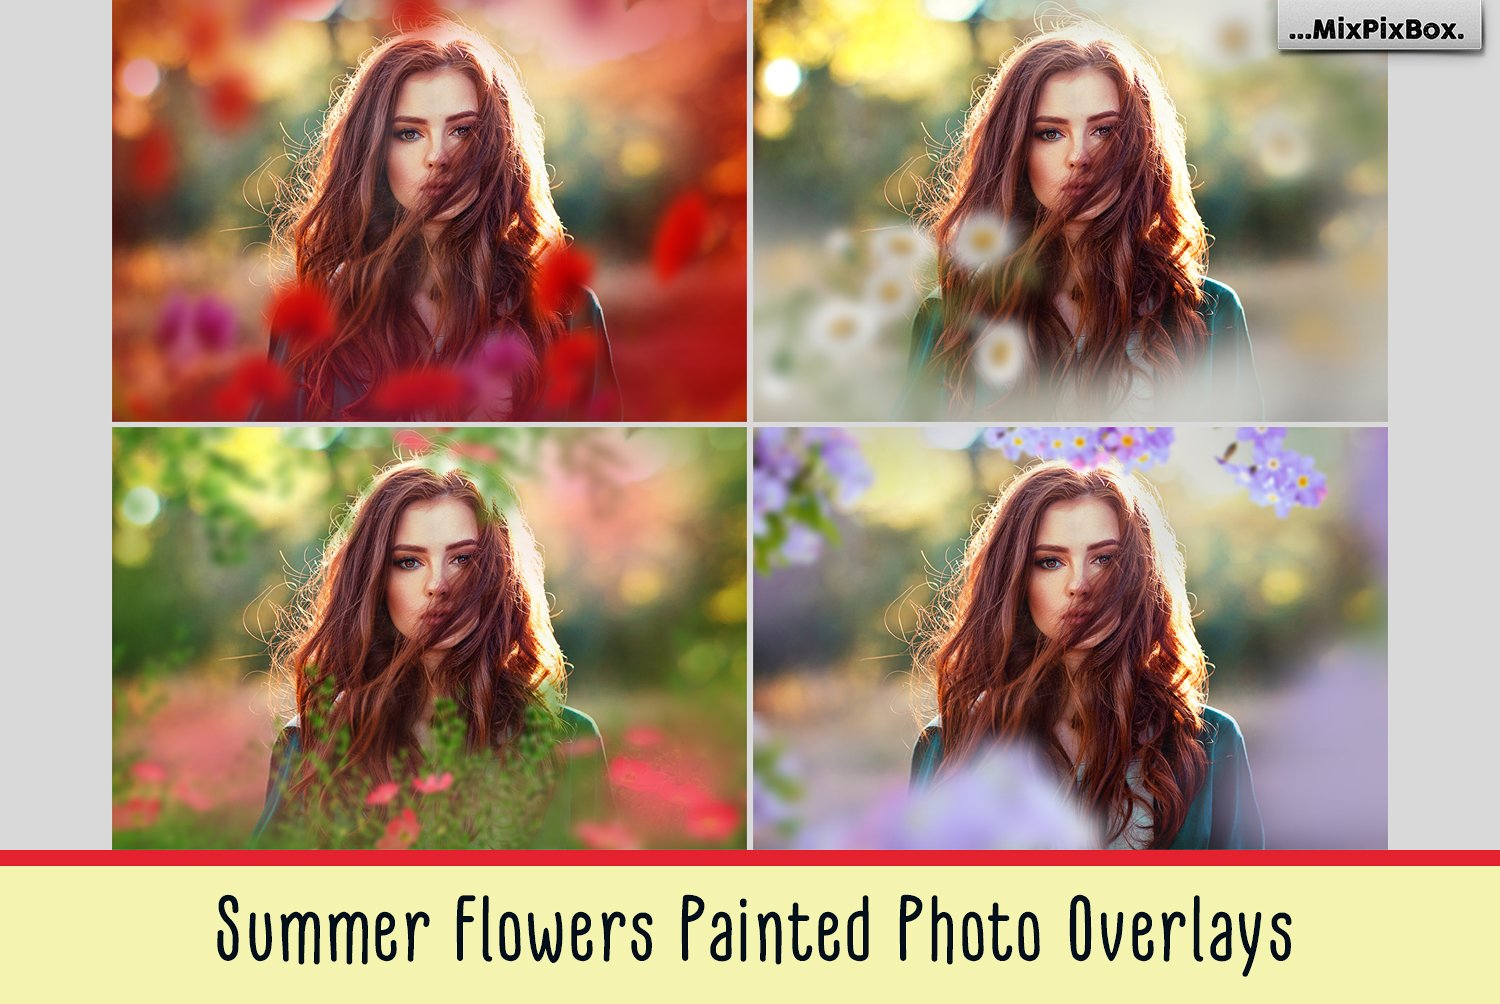 Summer Flowers Painted Overlayscover image.